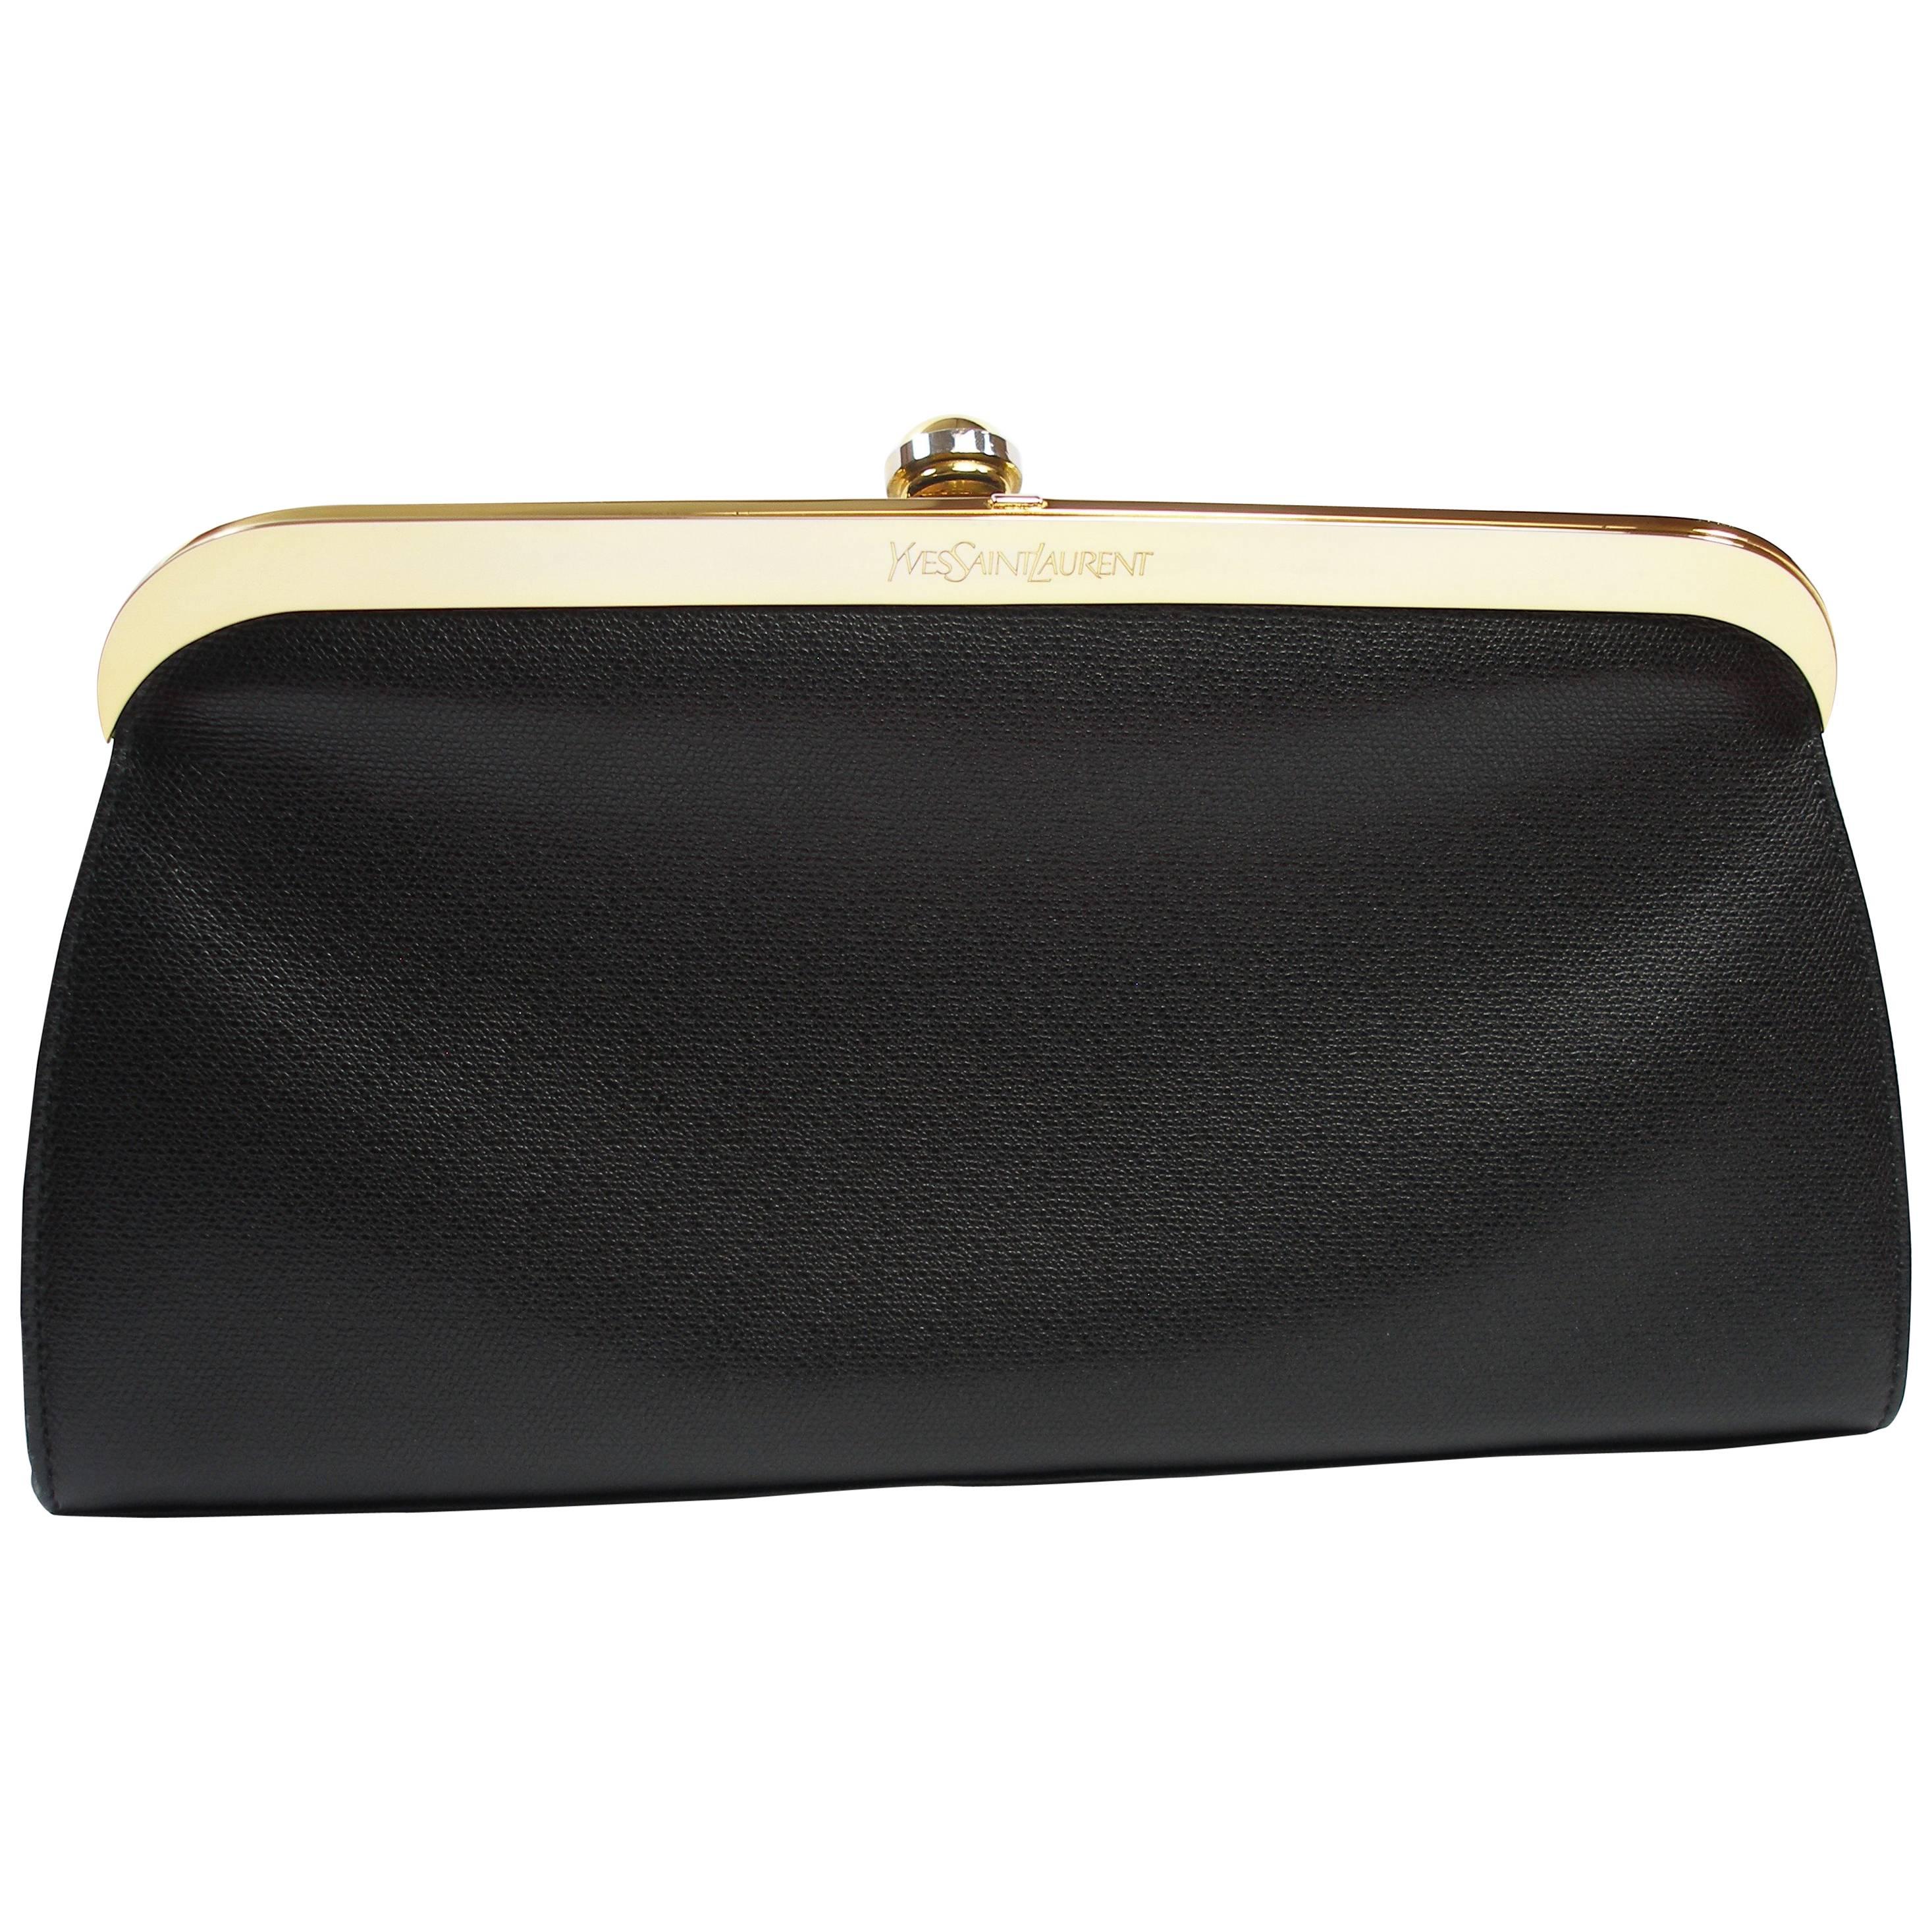 Yves Saint Laurent Clutch Gold Hadware Black leather 